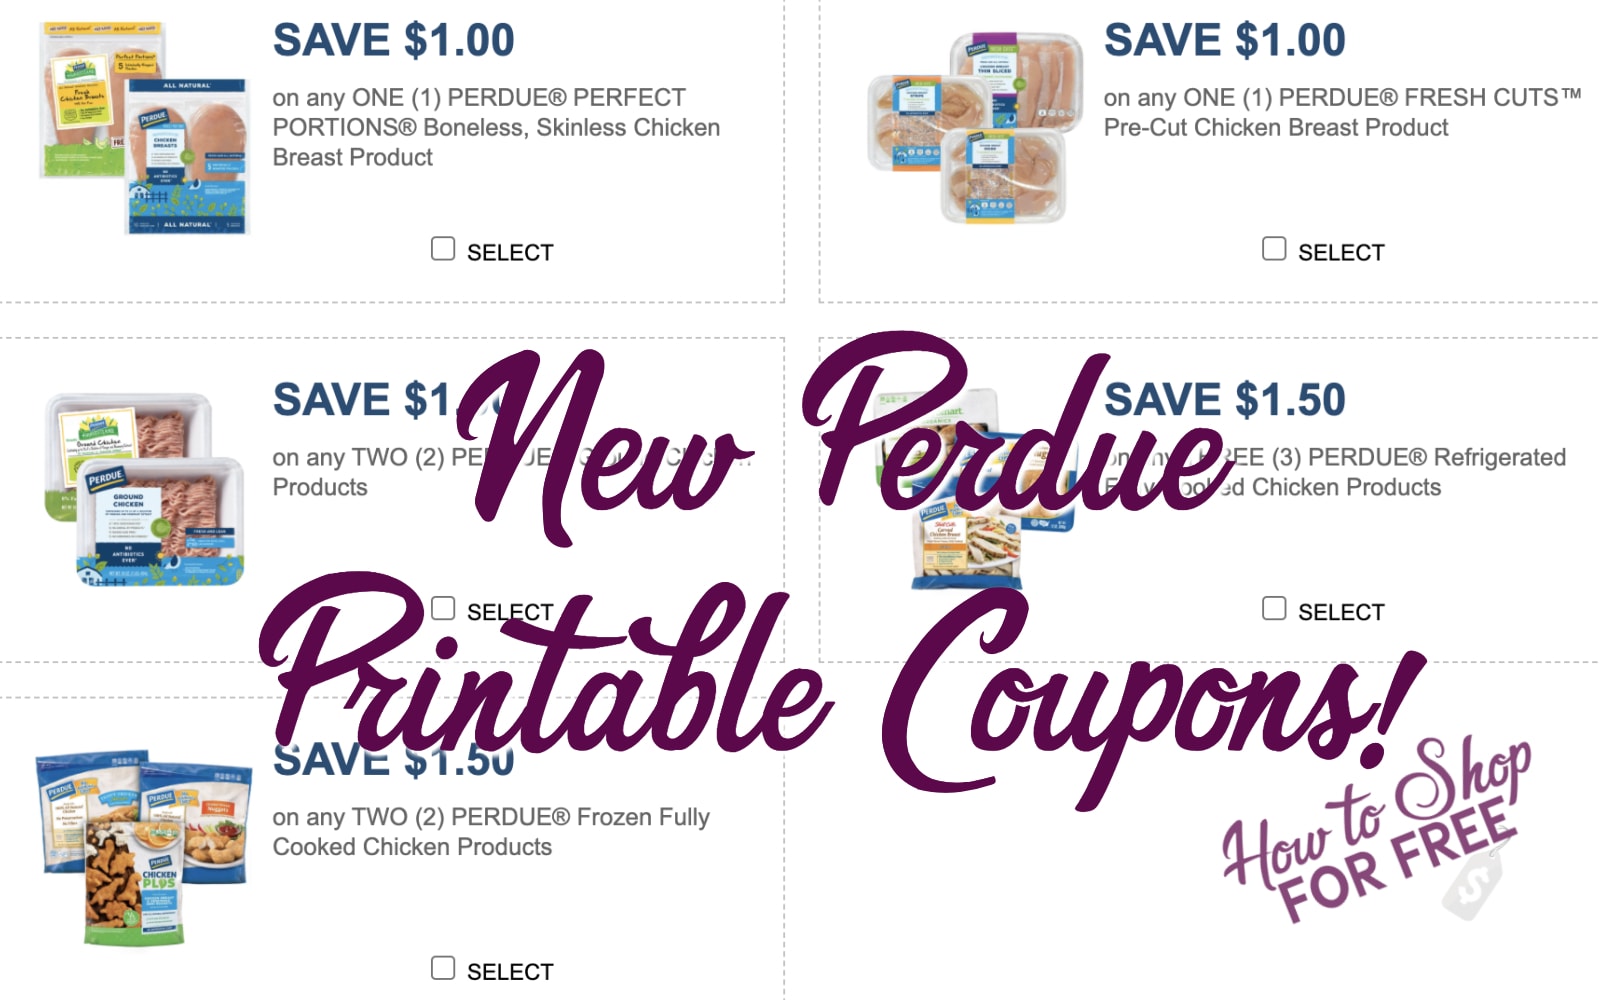 new-perdue-printable-coupons-how-to-shop-for-free-with-kathy-spencer